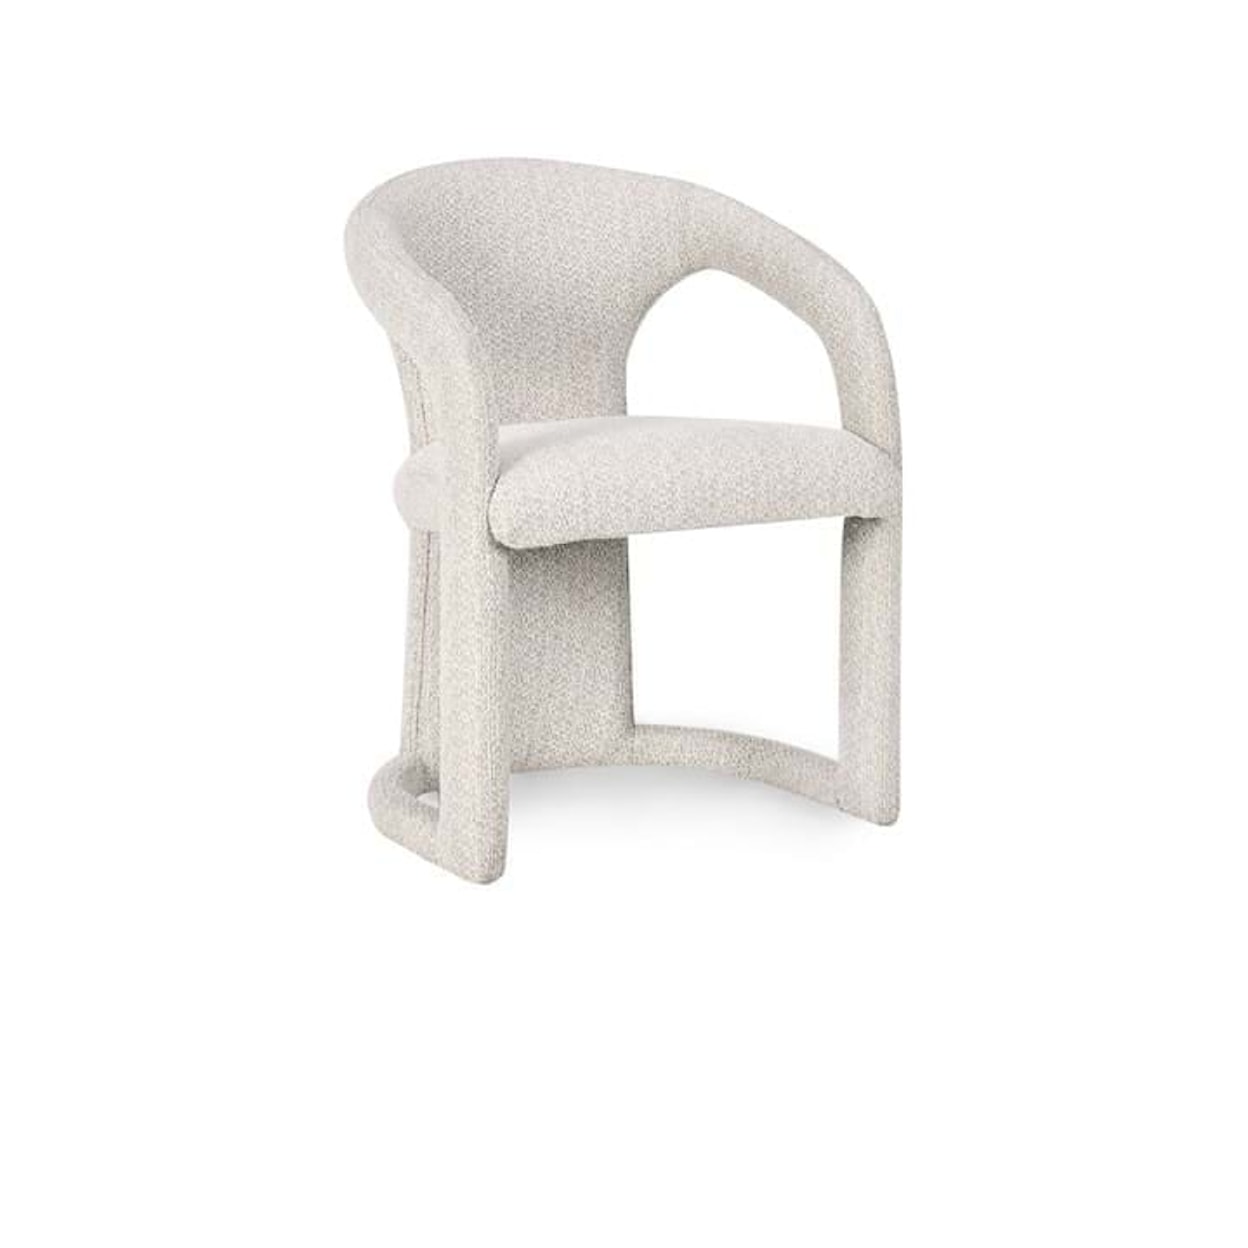 Classic Home Archie Archie Upholstered Dining Chair